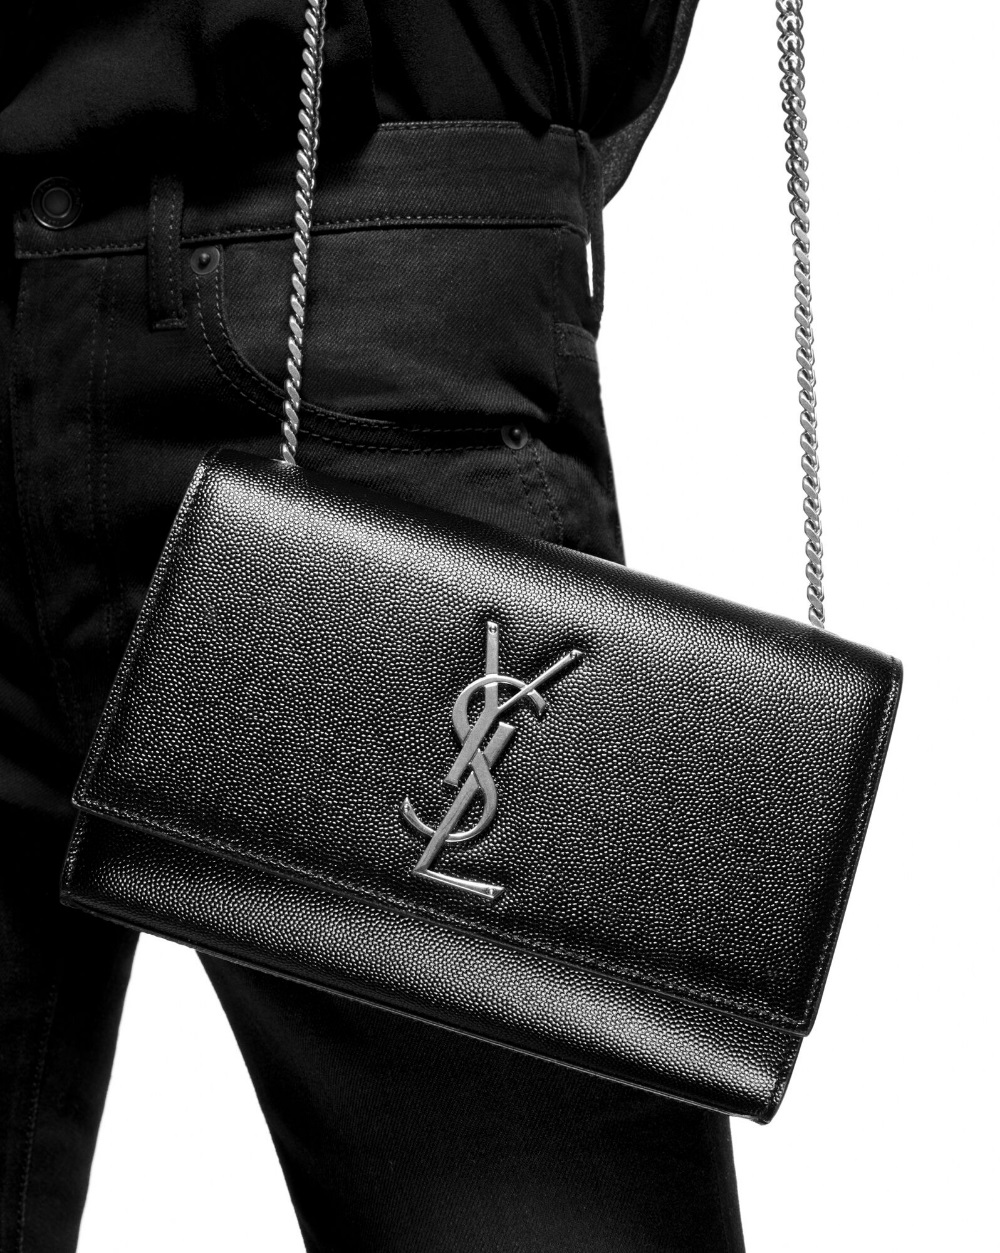 TÚI ĐEO CHÉO NỮ YSL SAINT LAURENT KATE SMALL TEXTURED LEATHER SHOULDER BAG IN BLACK 3